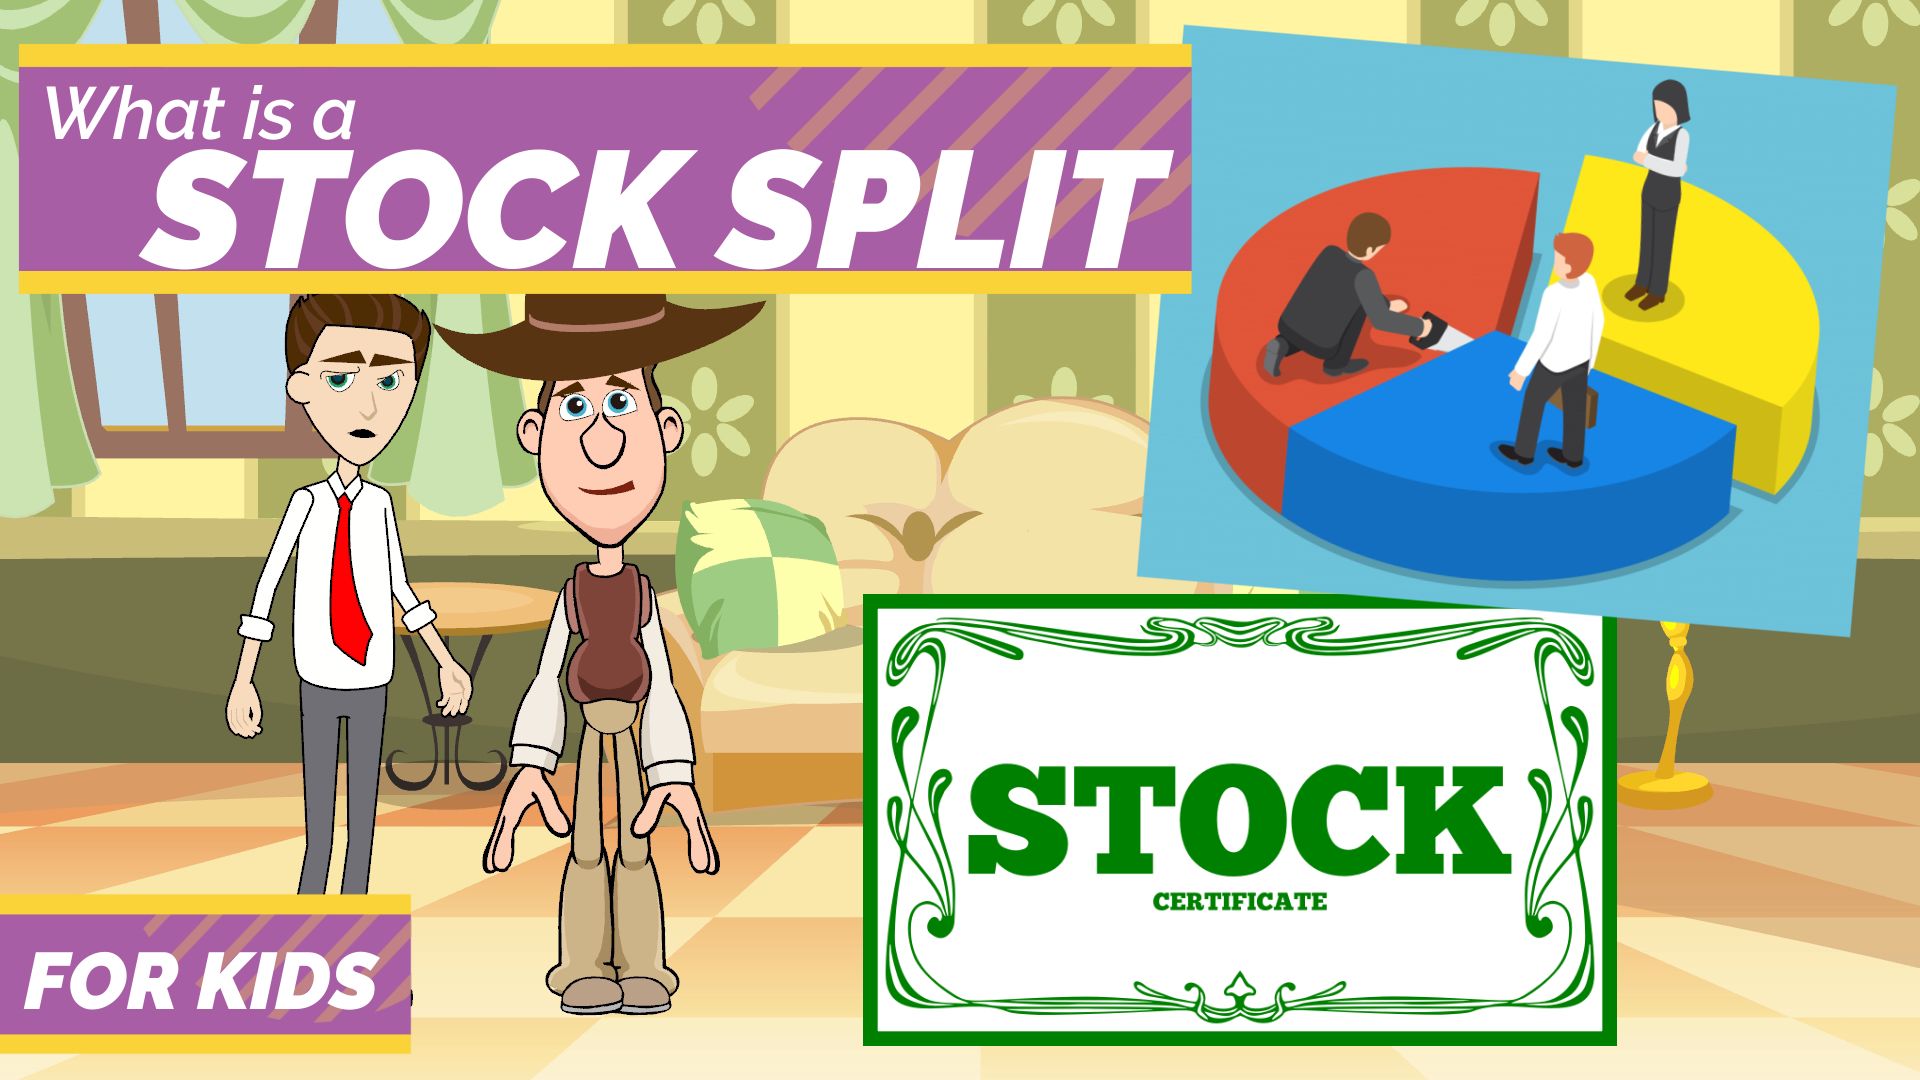 What is a Stock Split